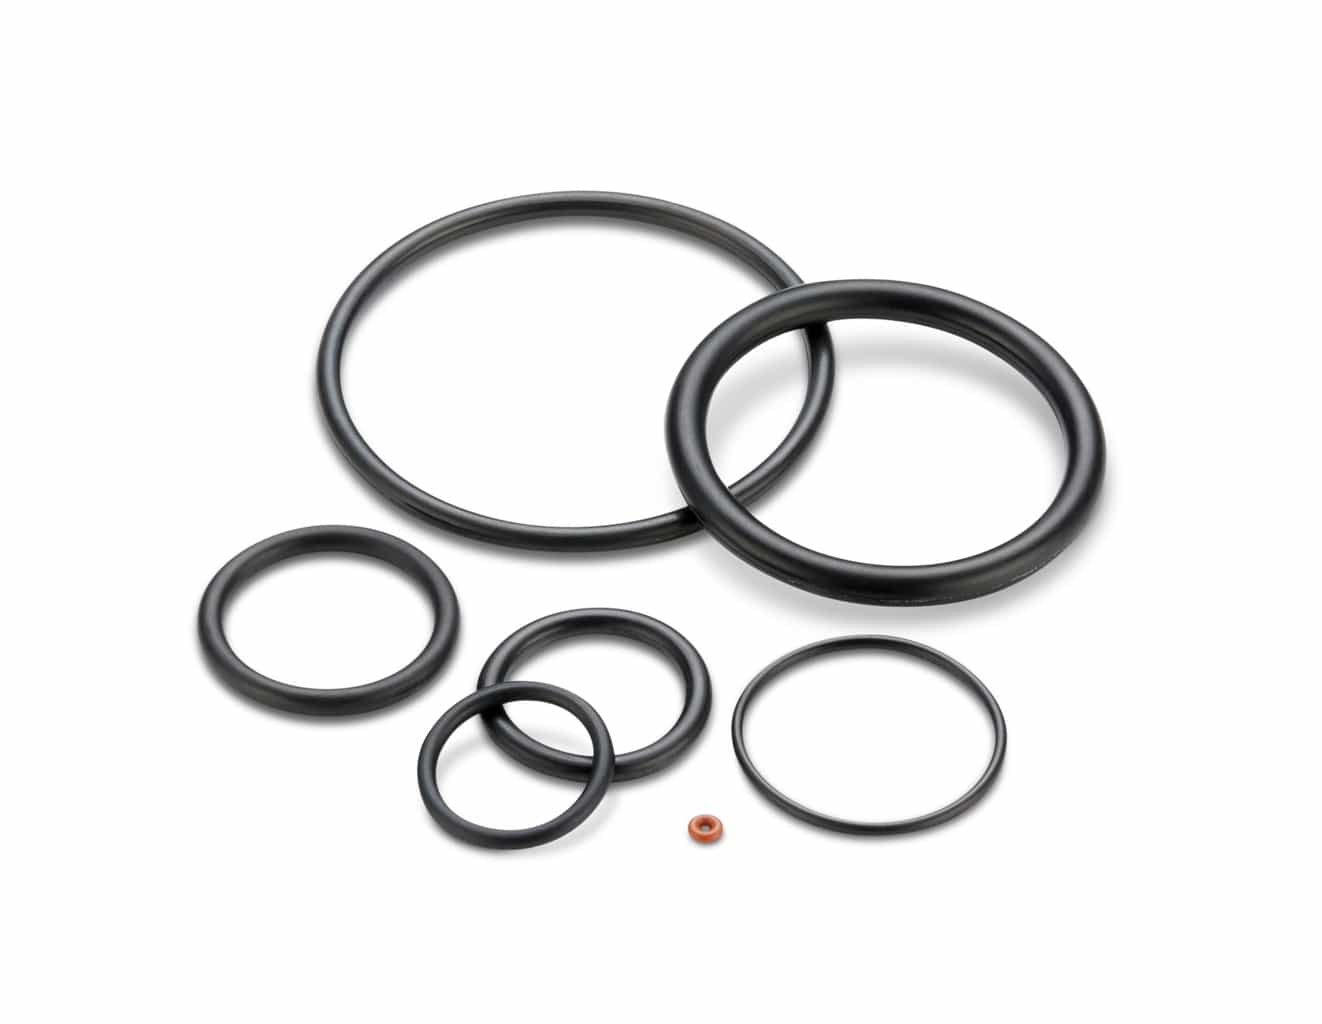 Selection Guide/Standard Size Quad-Ring® Brand Seals and Quad